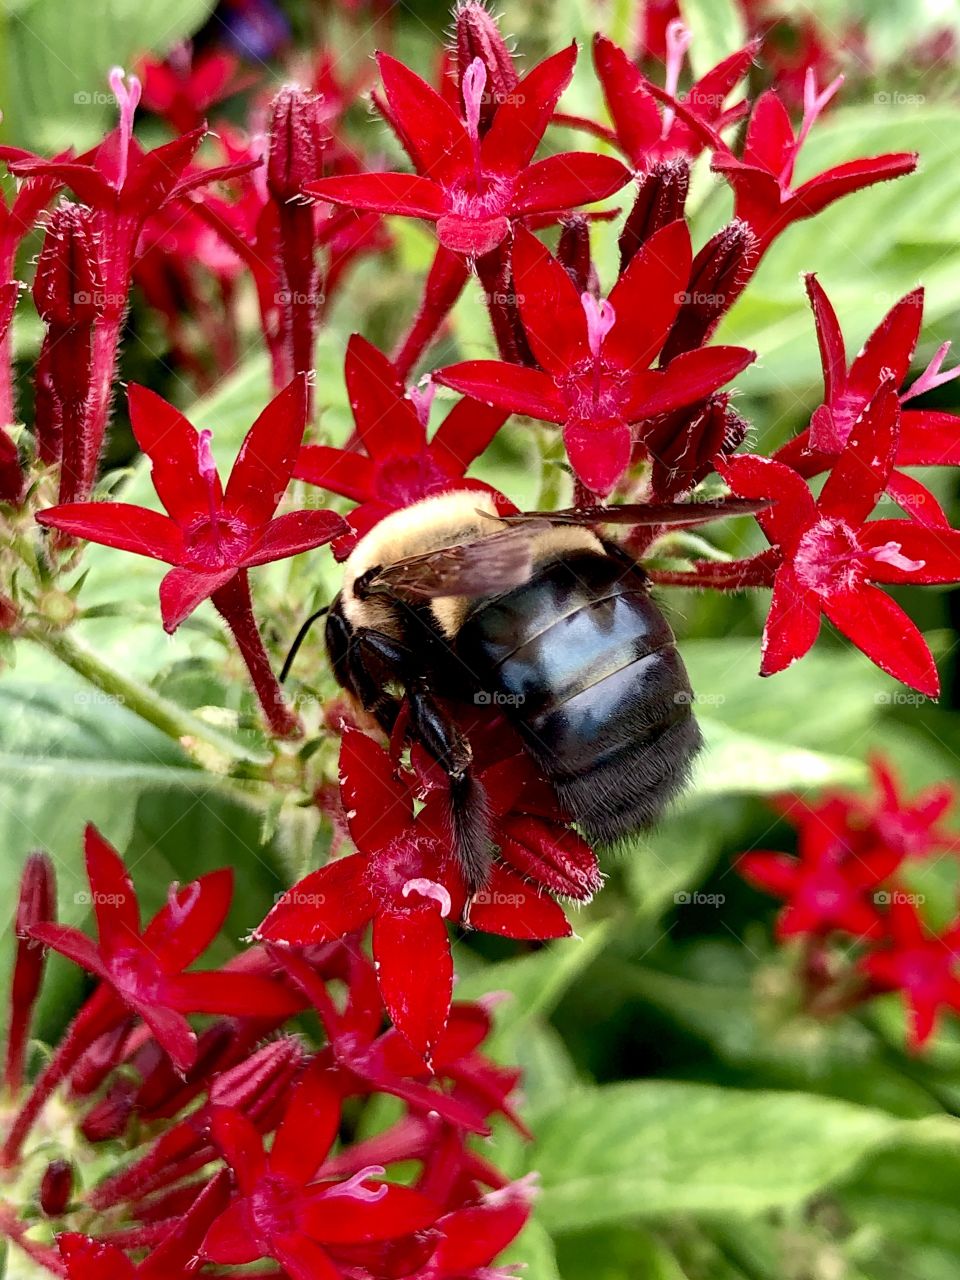 Bee pollinating bright red flowers